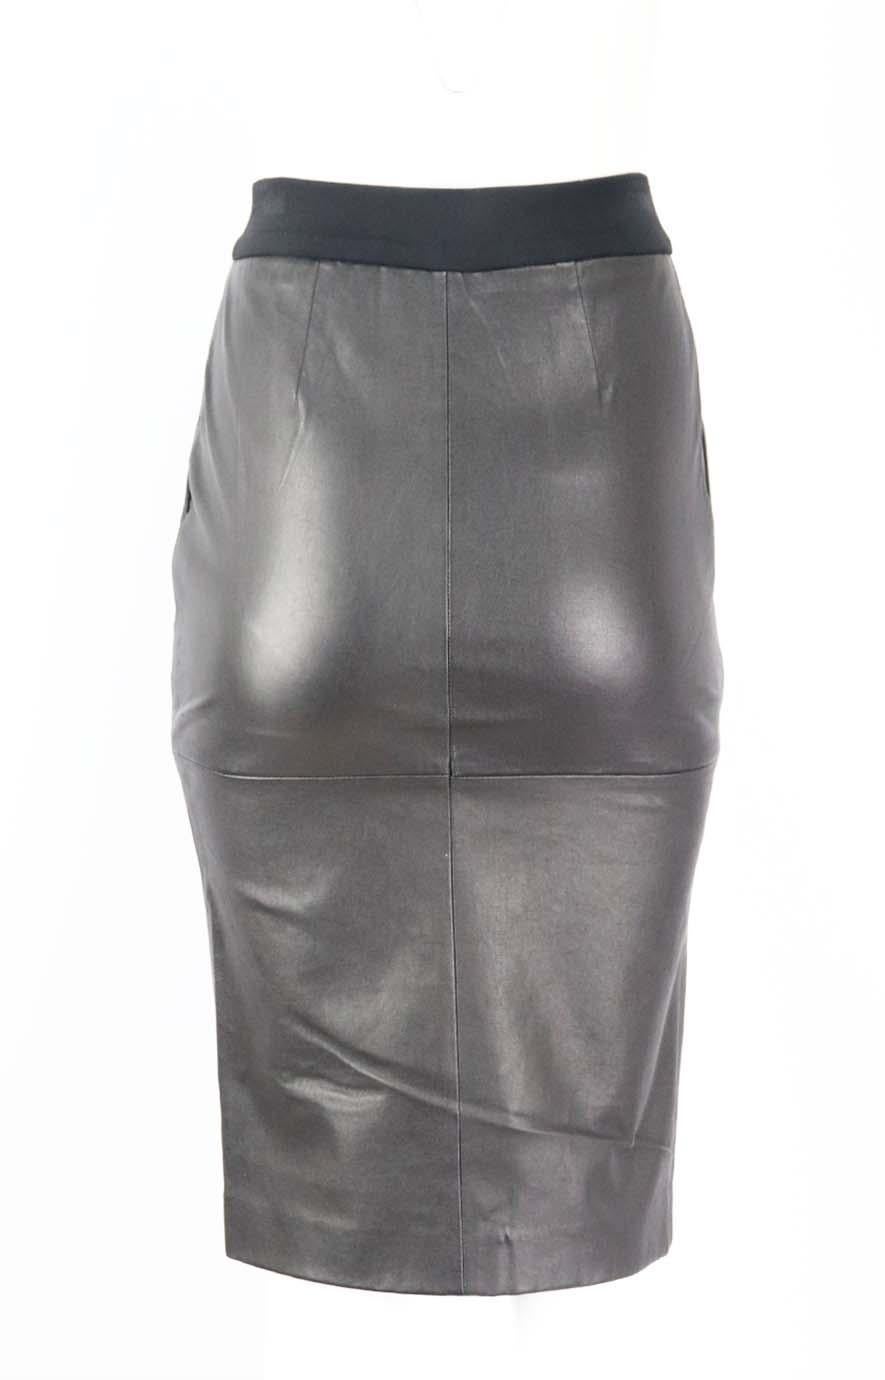 This sleek skirt is crafted from supple black leather with edgy silver zip down the front - a nod to the label's luxurious rock 'n' roll aesthetic, it's fully lined in silk for a smooth fit. Black leather. Zip fastening at front. 100% Leather;